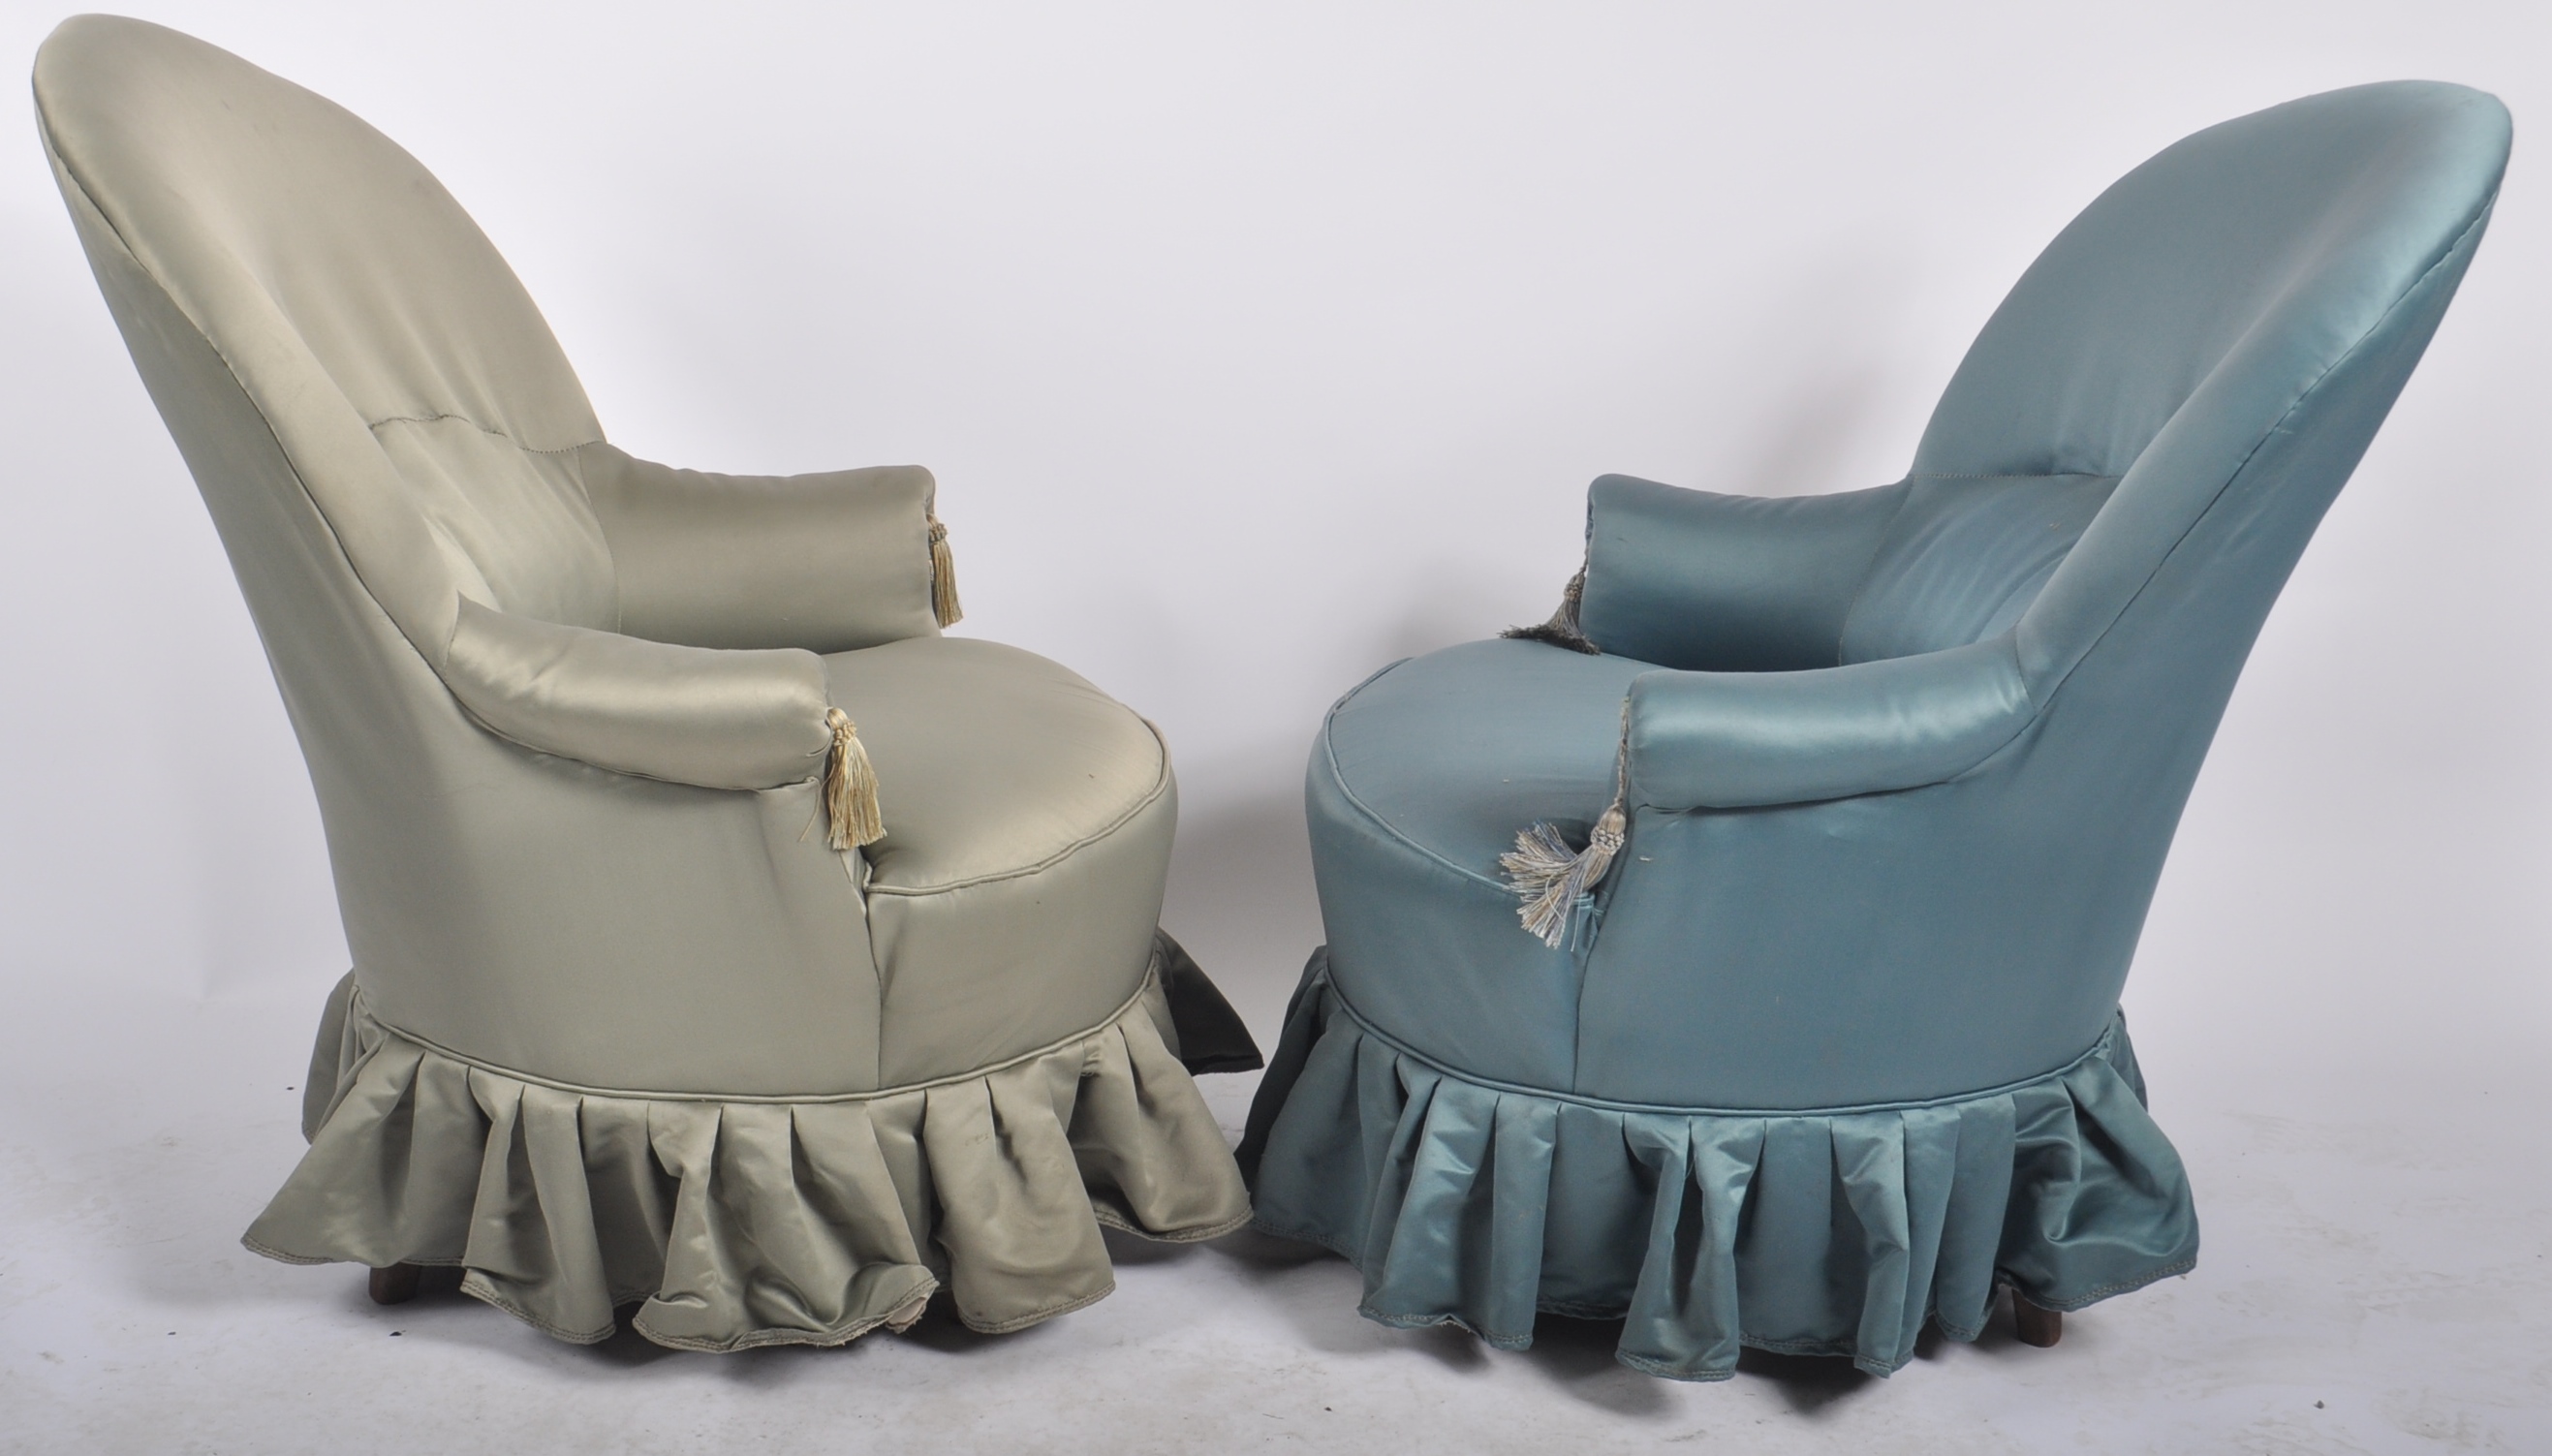 MATCHING PAIR OF FRENCH SALON ARM CHAIRS / BEDROOM CHAIRS - Image 5 of 5